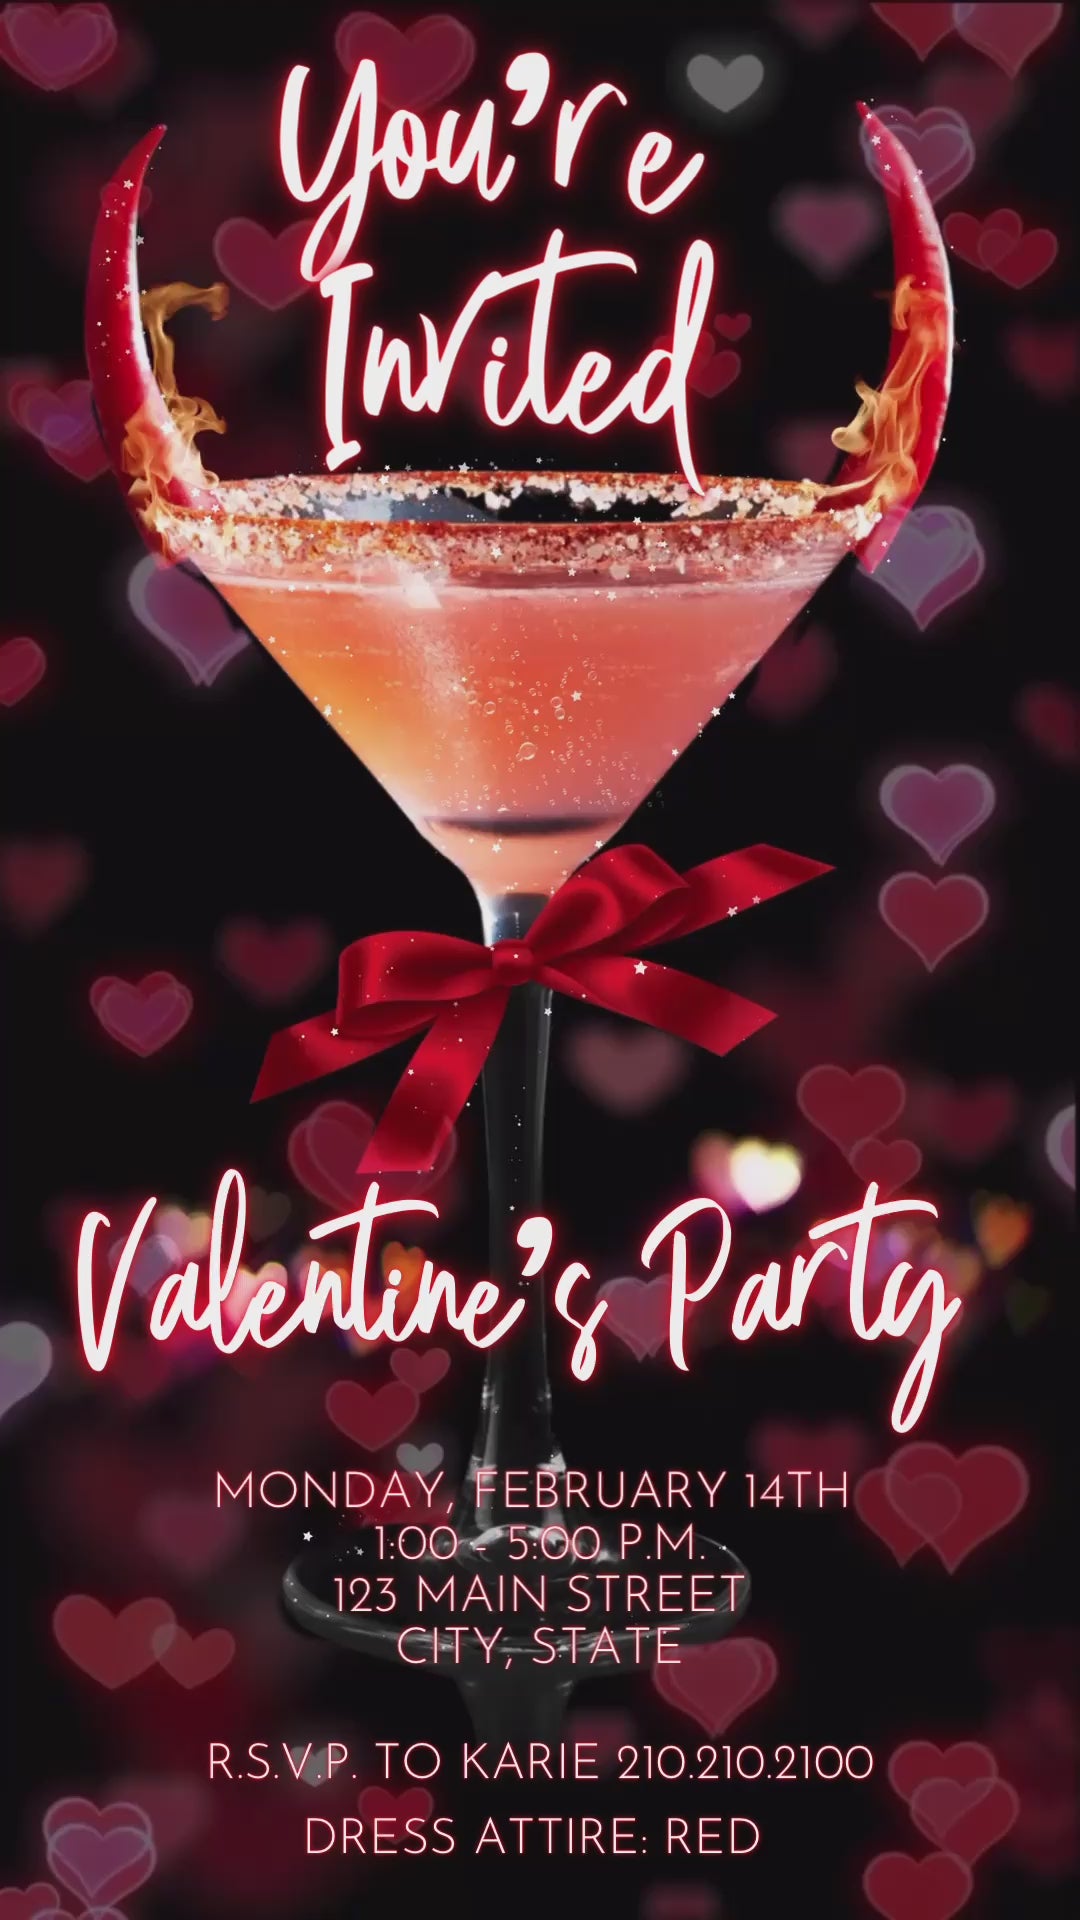 Valentine’s Day Invitation and Itinerary, V-Day Cocktail Party Invite